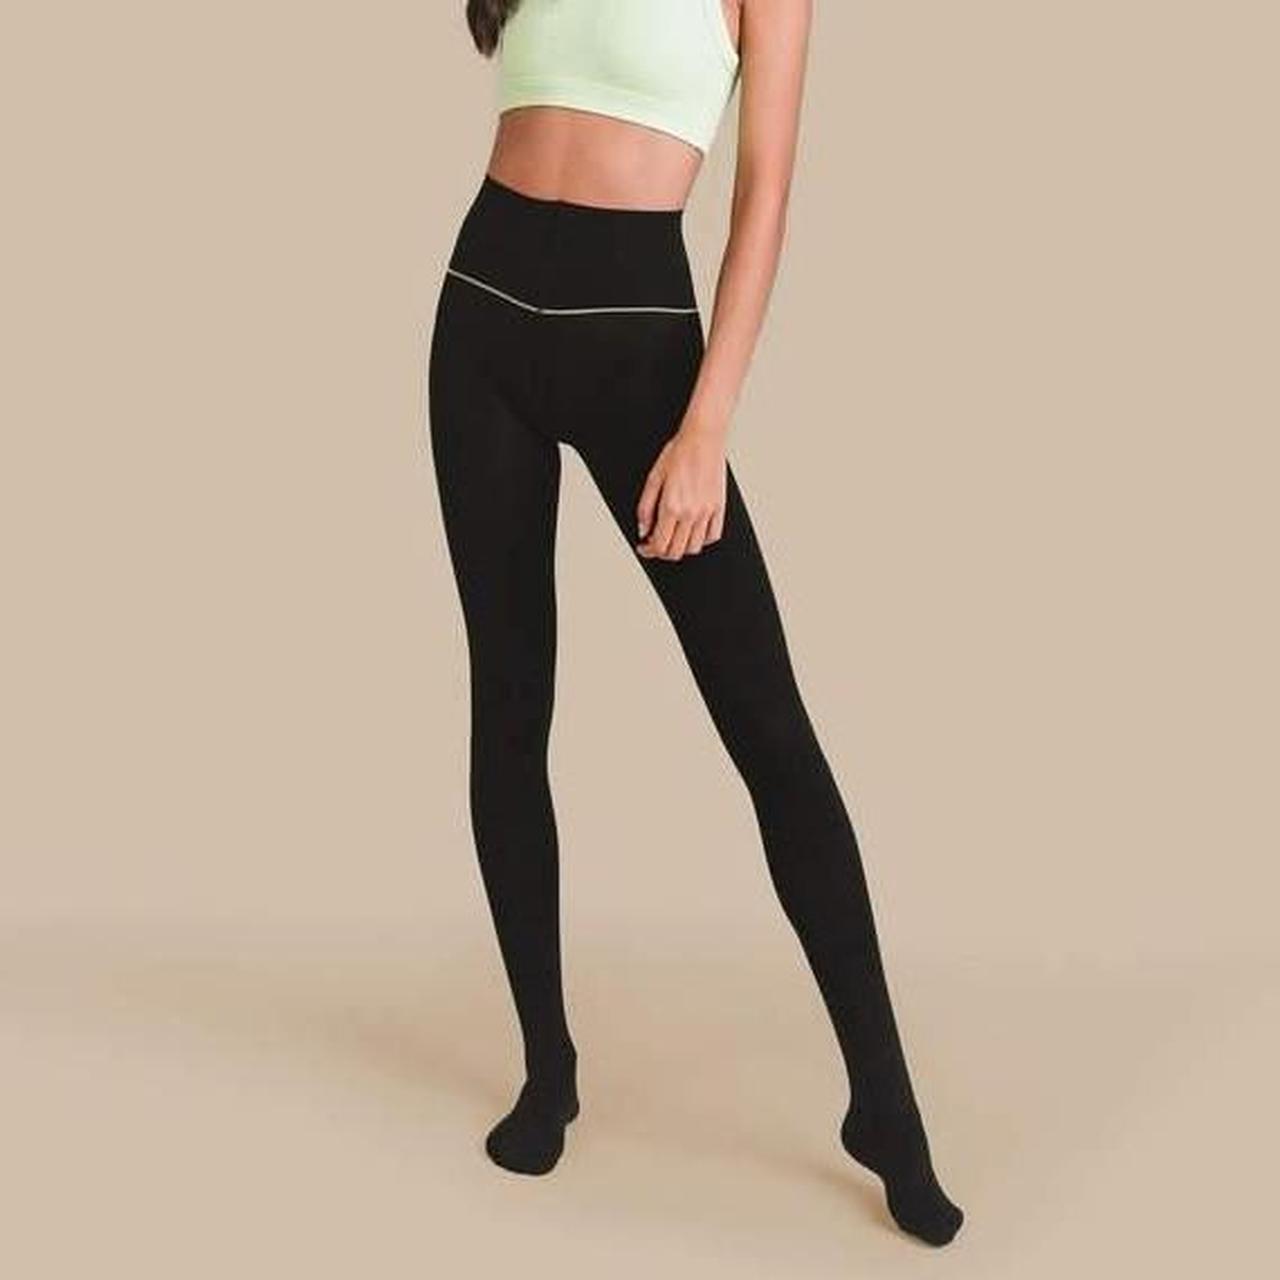 Product Image 4 - (On hold!)

NWT black semi-opaque tights